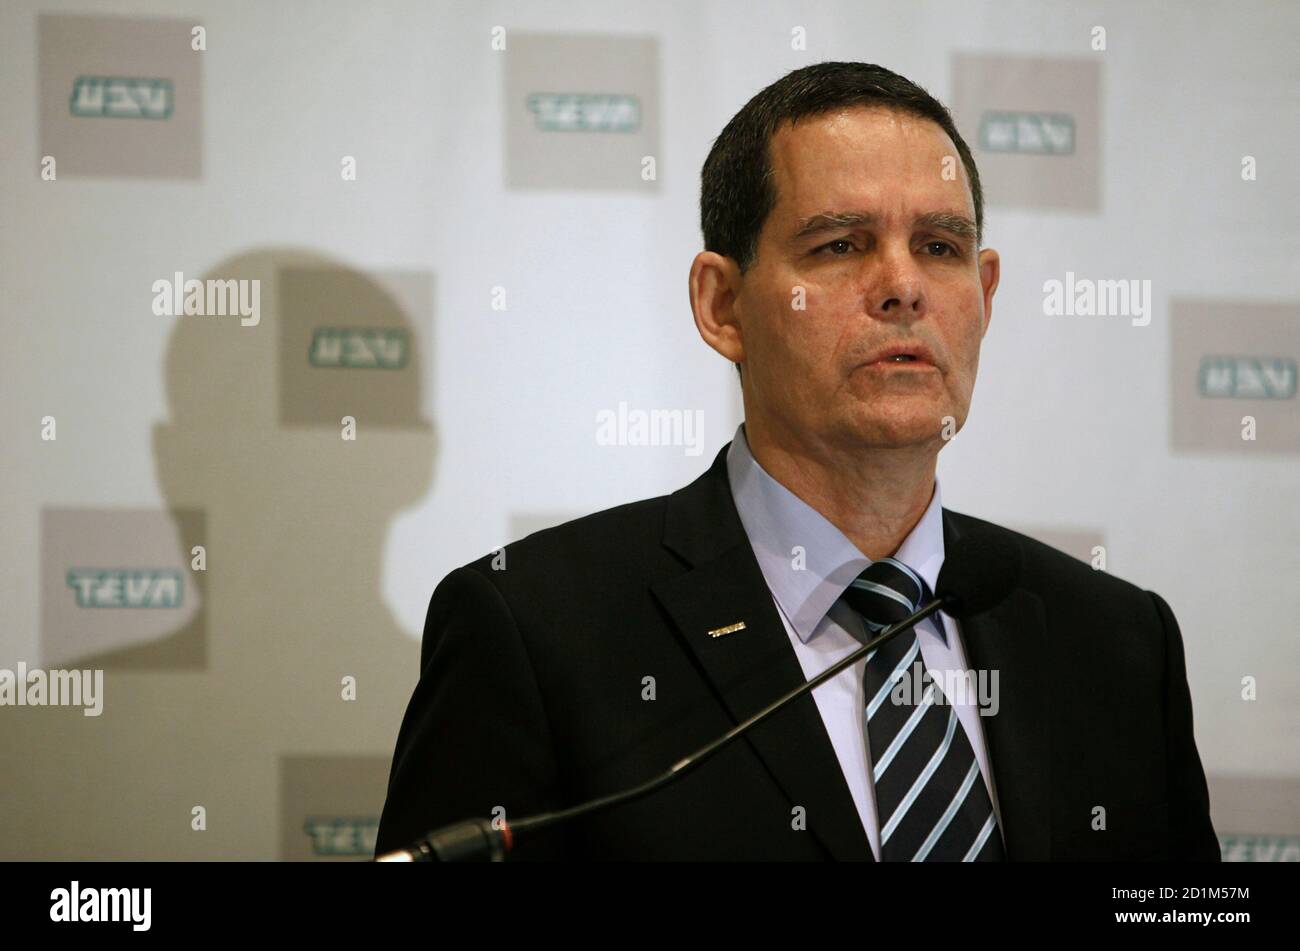 Panorama kapre Klan Shlomo Yanai, Teva's president and chief executive, addresses the media  during a news conference in Tel Aviv July 27, 2010. Teva Pharmaceutical  Industries, the world's largest generic drugmaker, reported higher  quarterly net